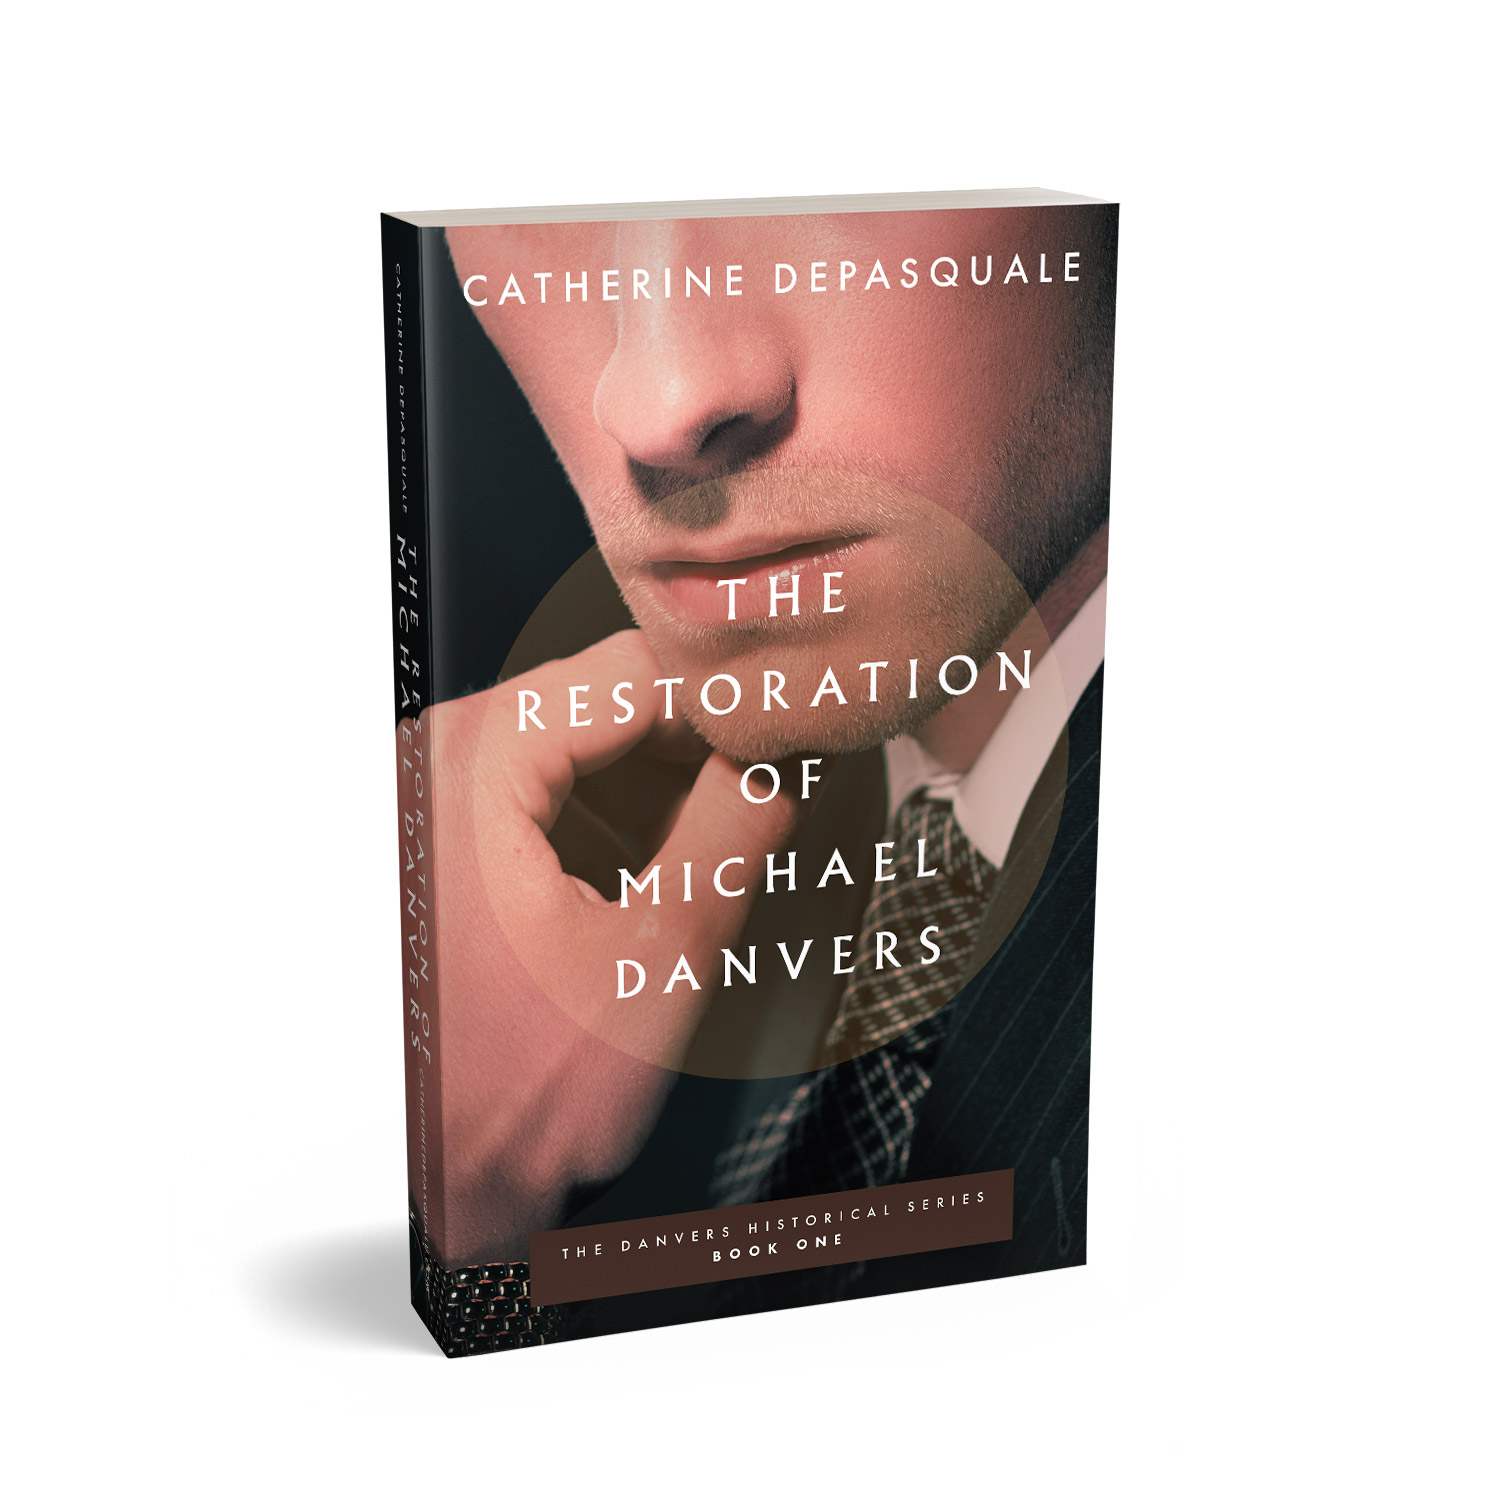 'The Restoration of Michael Danvers' is a faith-focussed character study, set in the late 1940s. The author is Catherine DePasquale. The book cover design and interior formatting are by Mark Thomas. To learn more about what Mark could do for your book, please visit coverness.com.